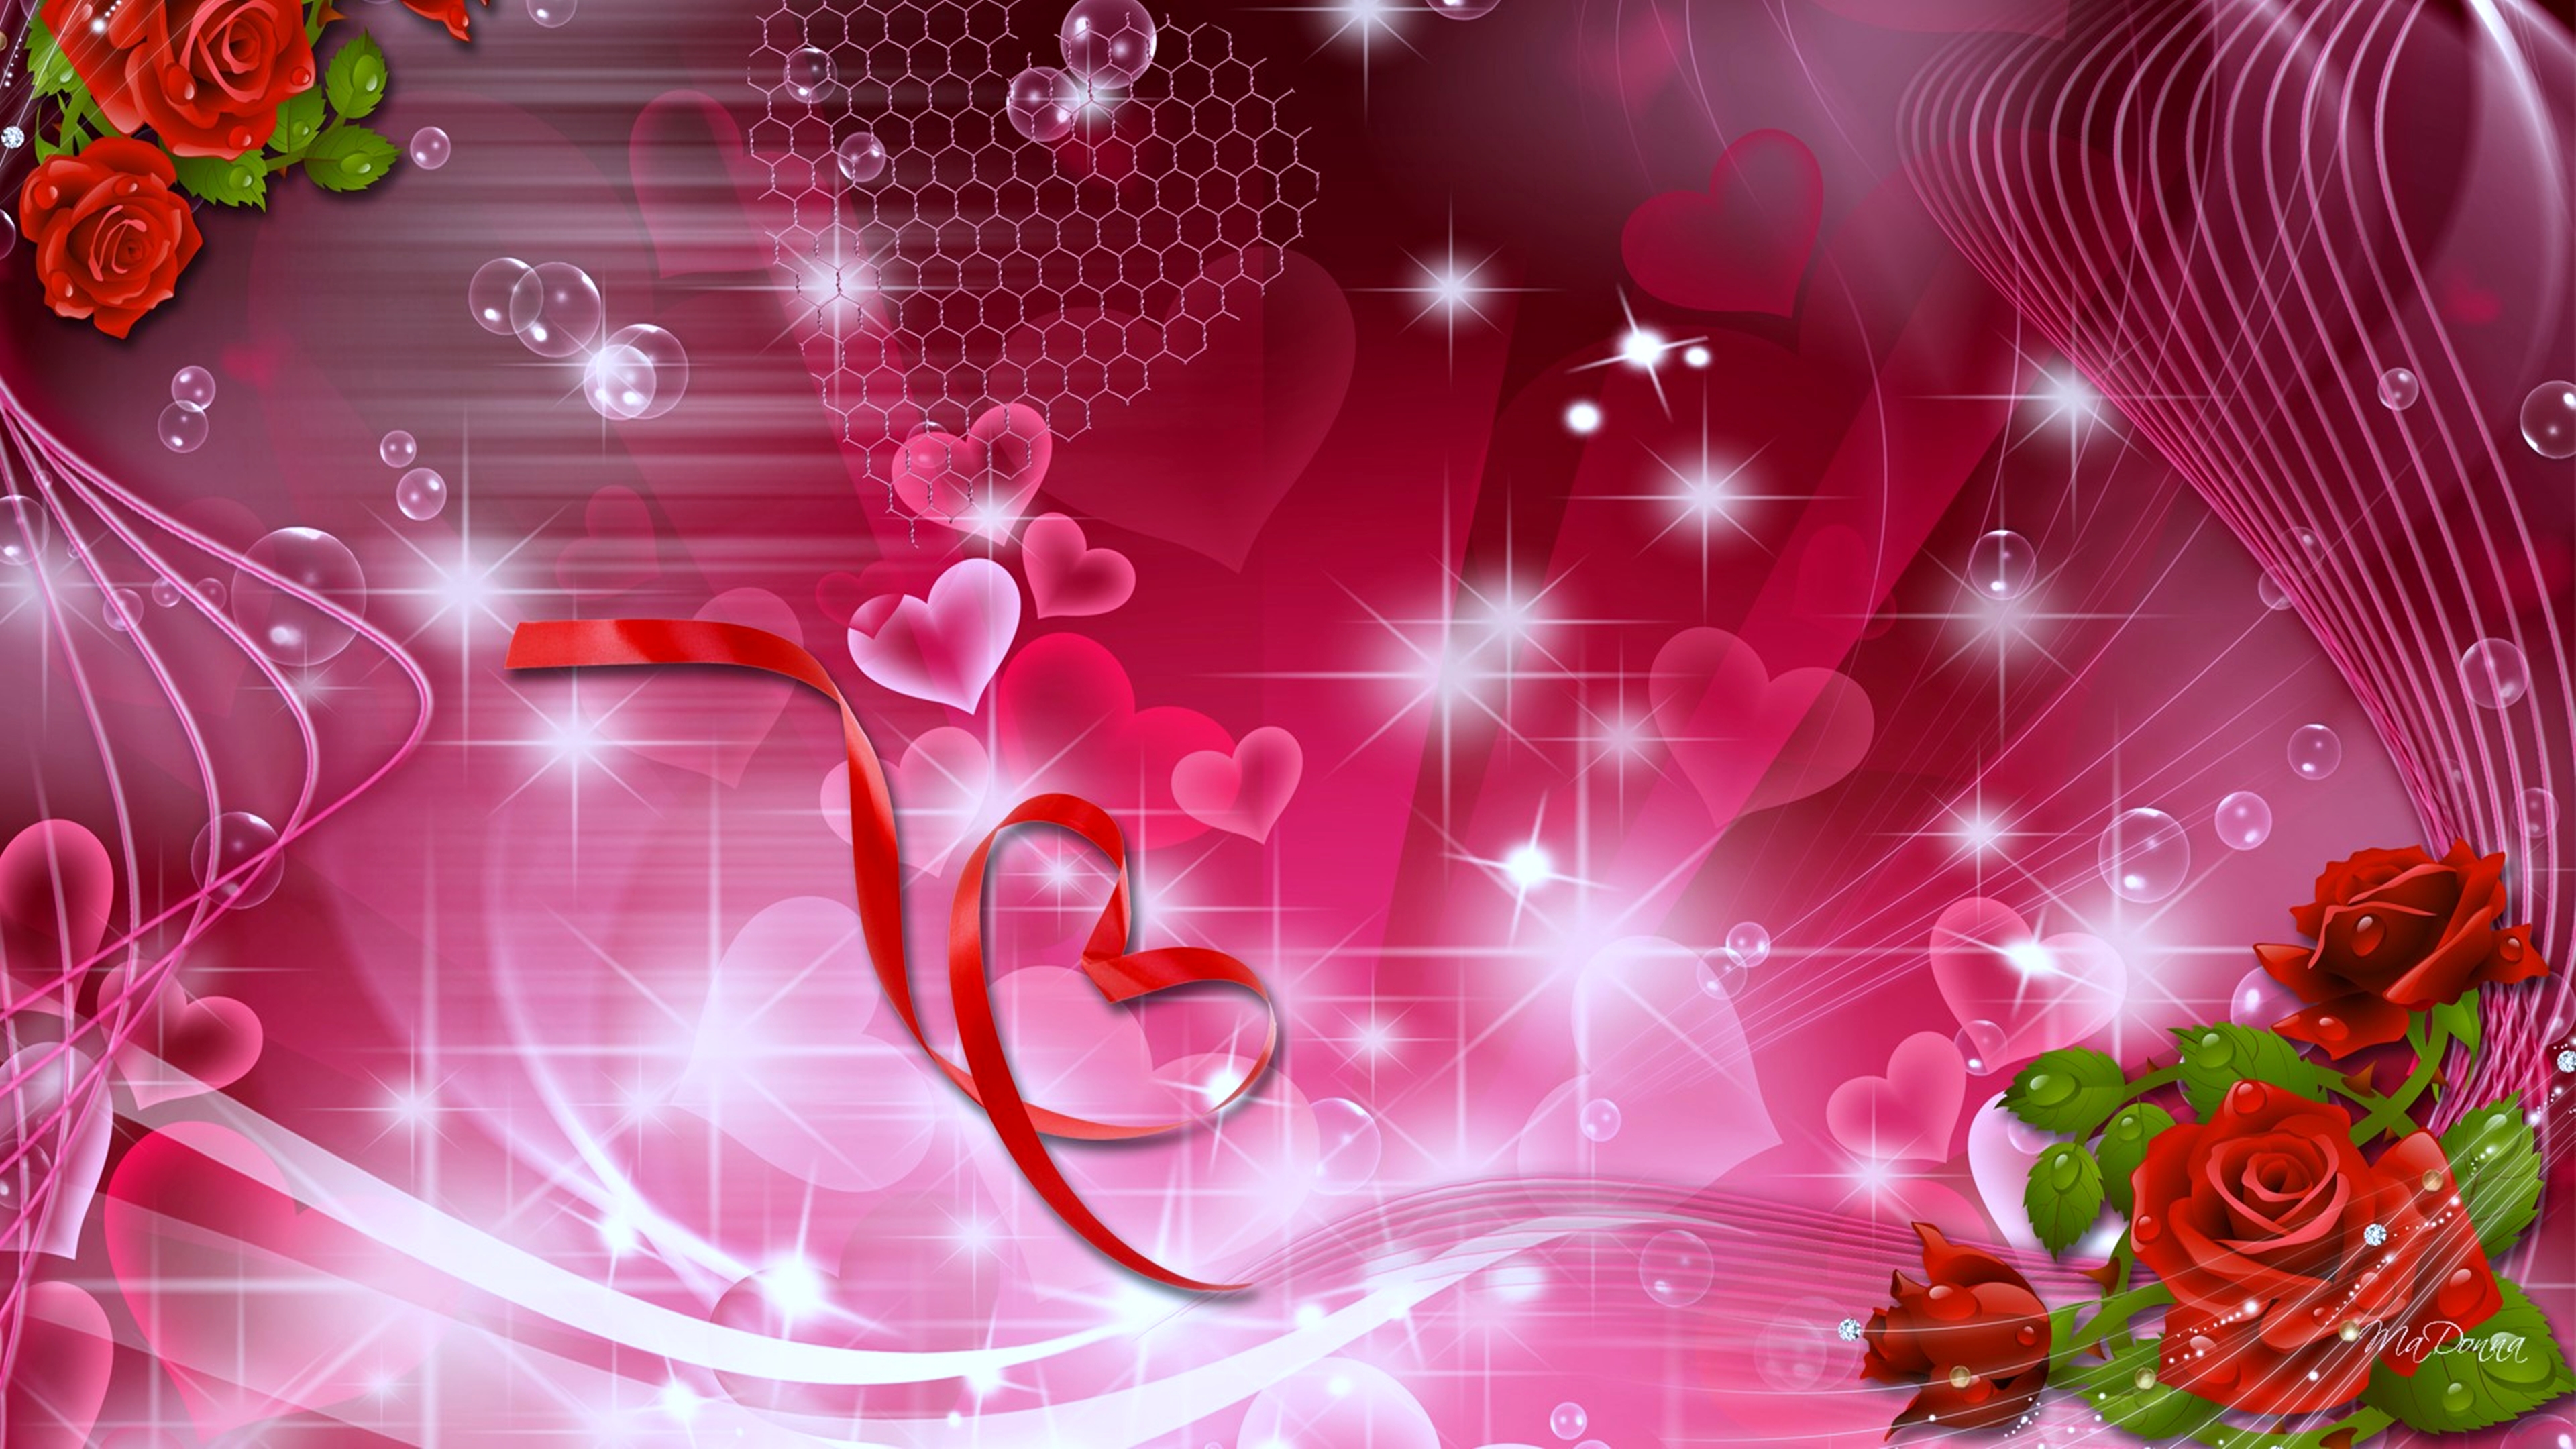 android love, artistic, rose, heart, romantic